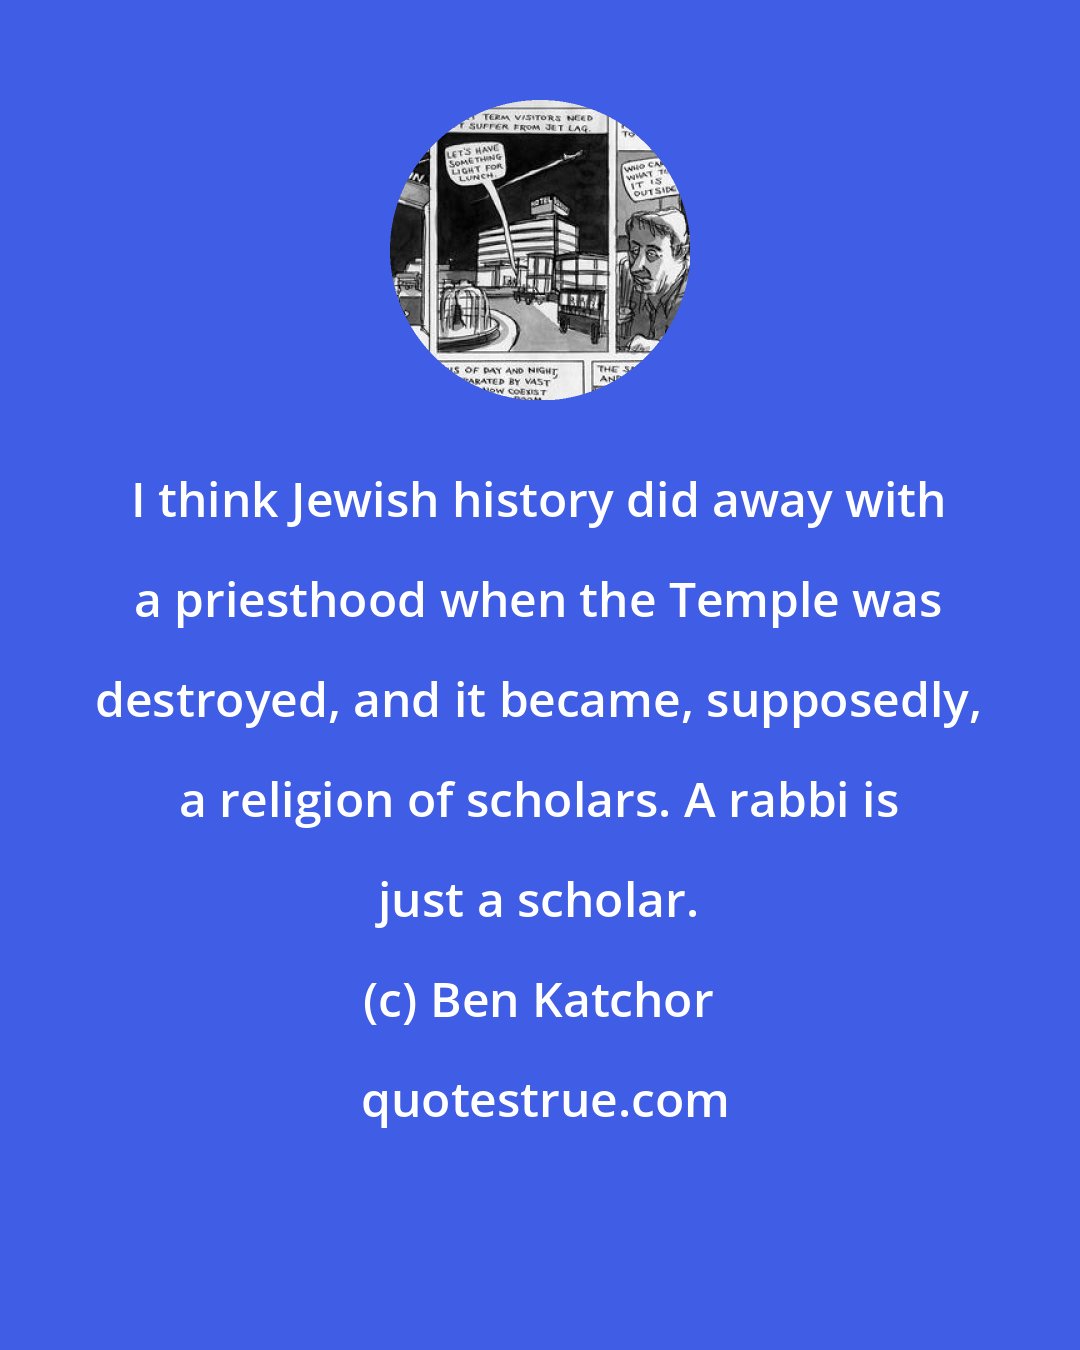 Ben Katchor: I think Jewish history did away with a priesthood when the Temple was destroyed, and it became, supposedly, a religion of scholars. A rabbi is just a scholar.